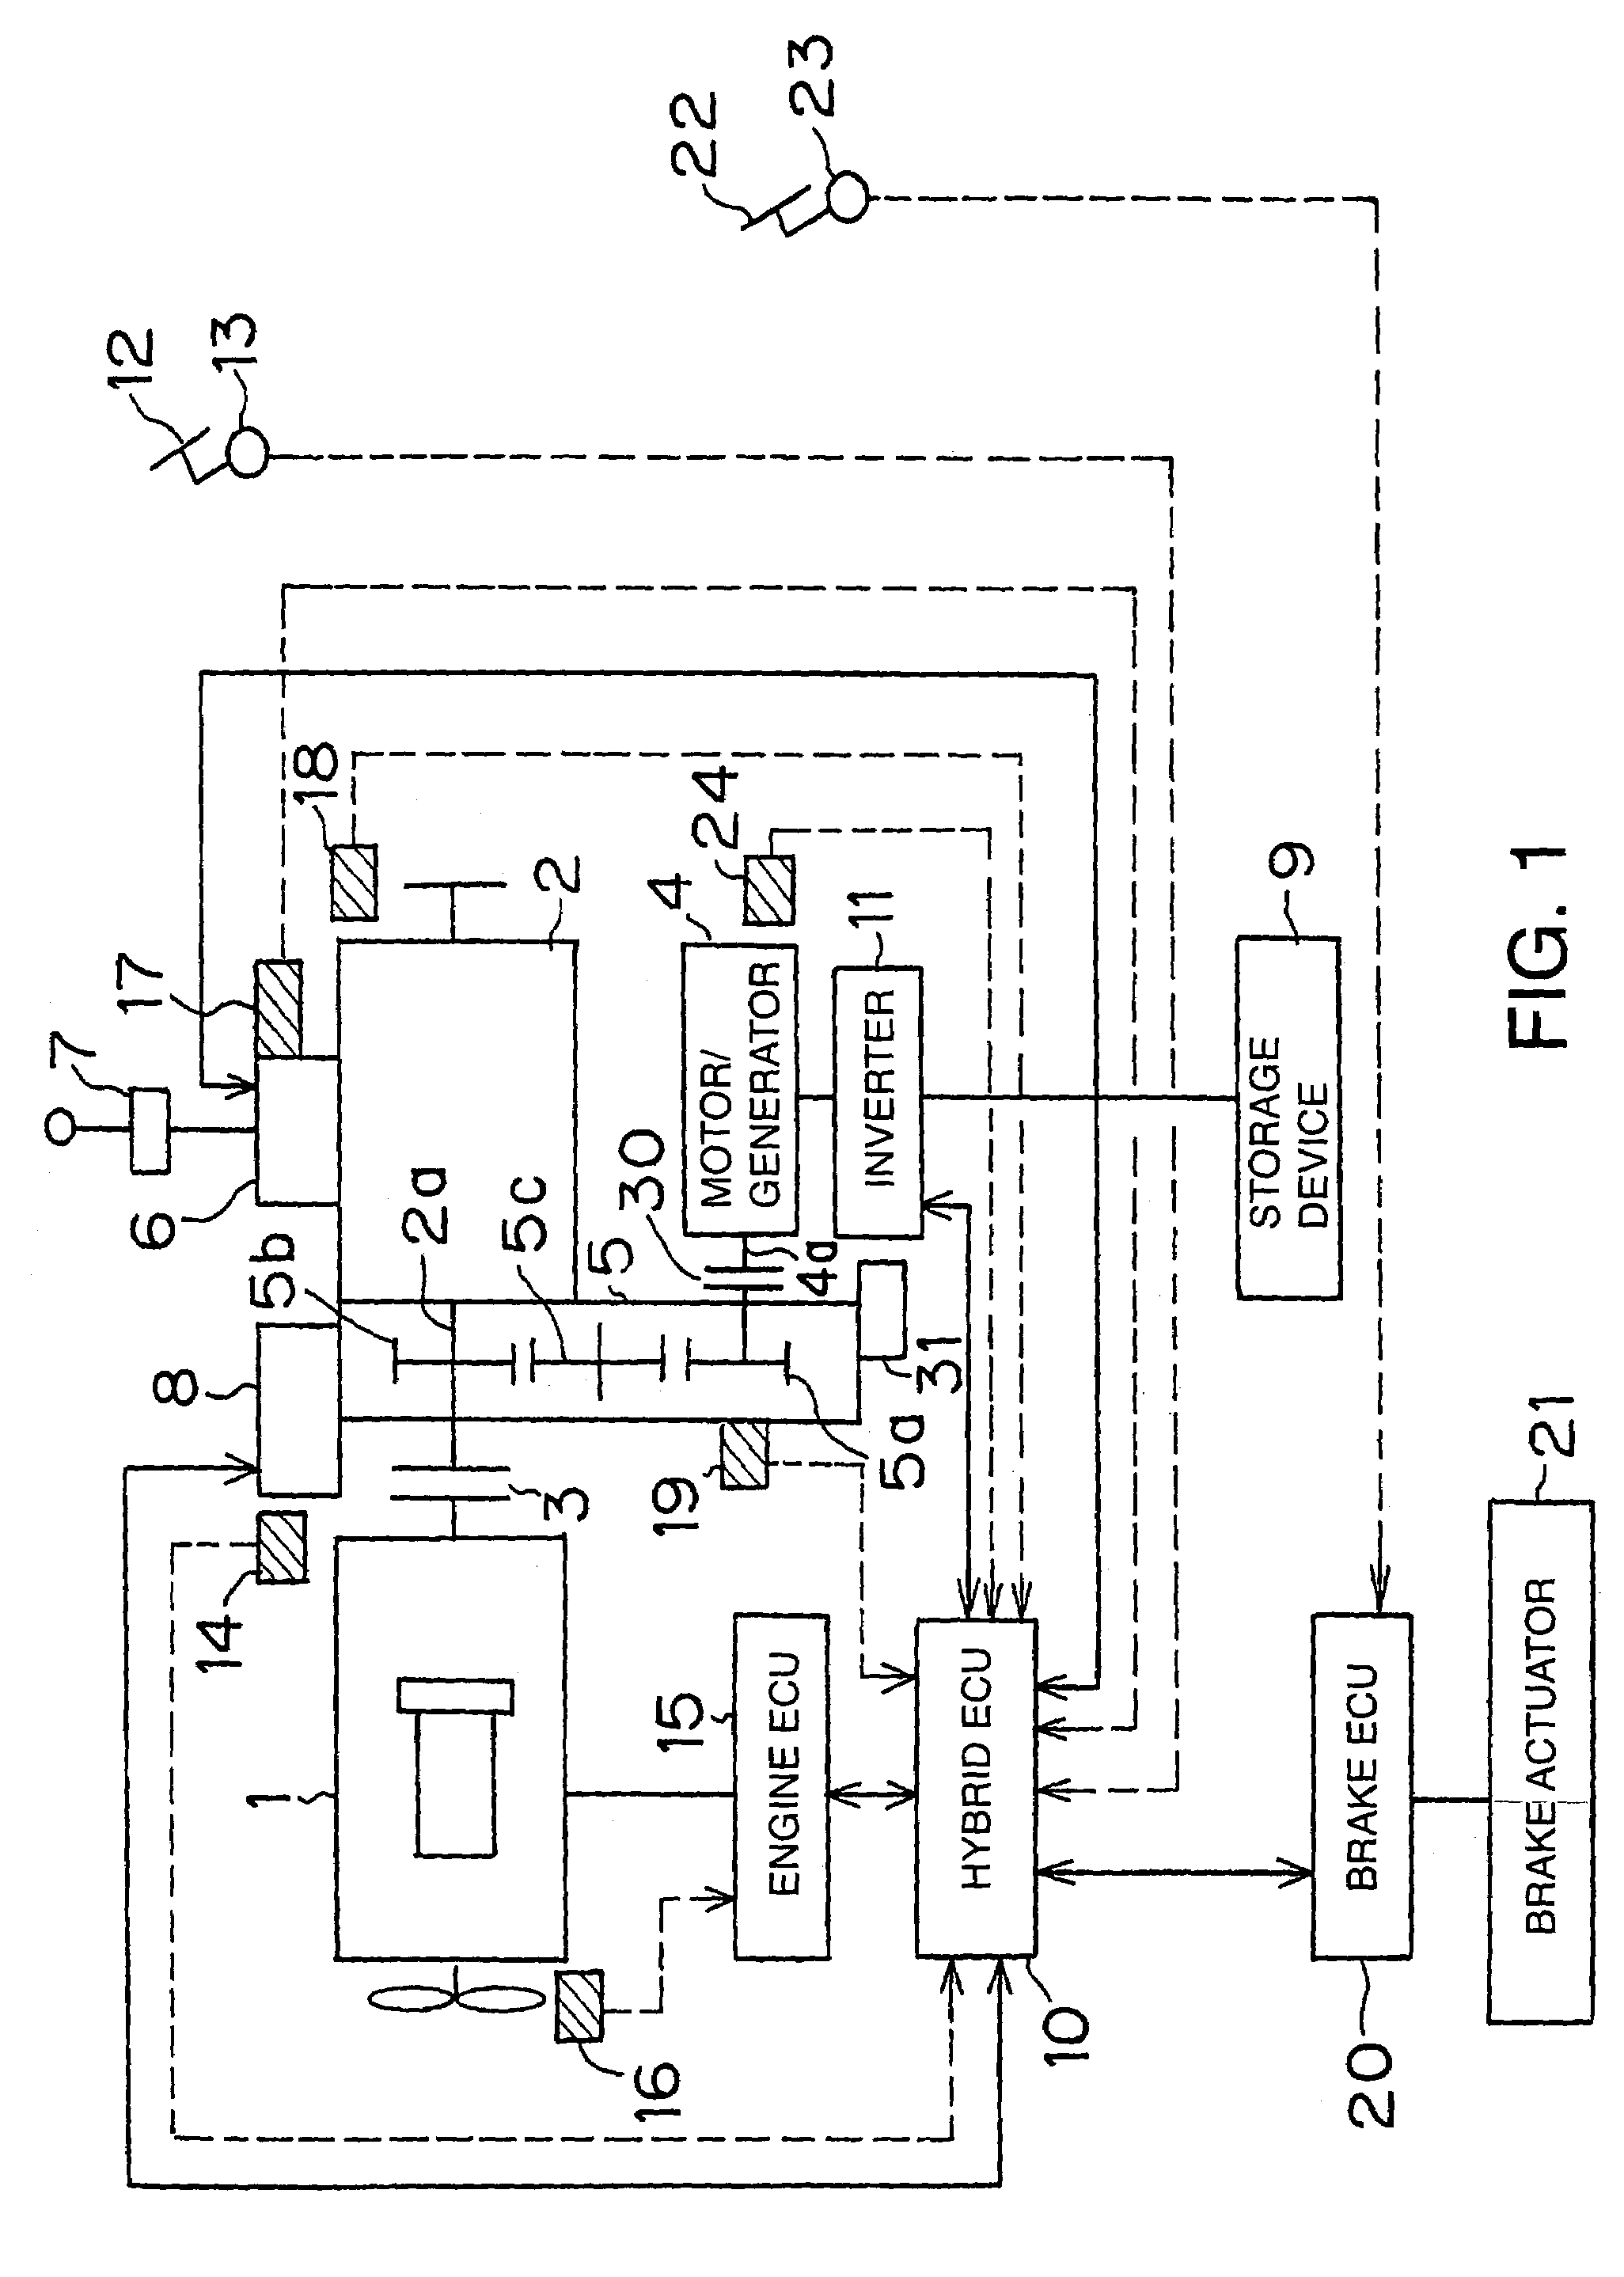 Hybrid drive system of vehicle